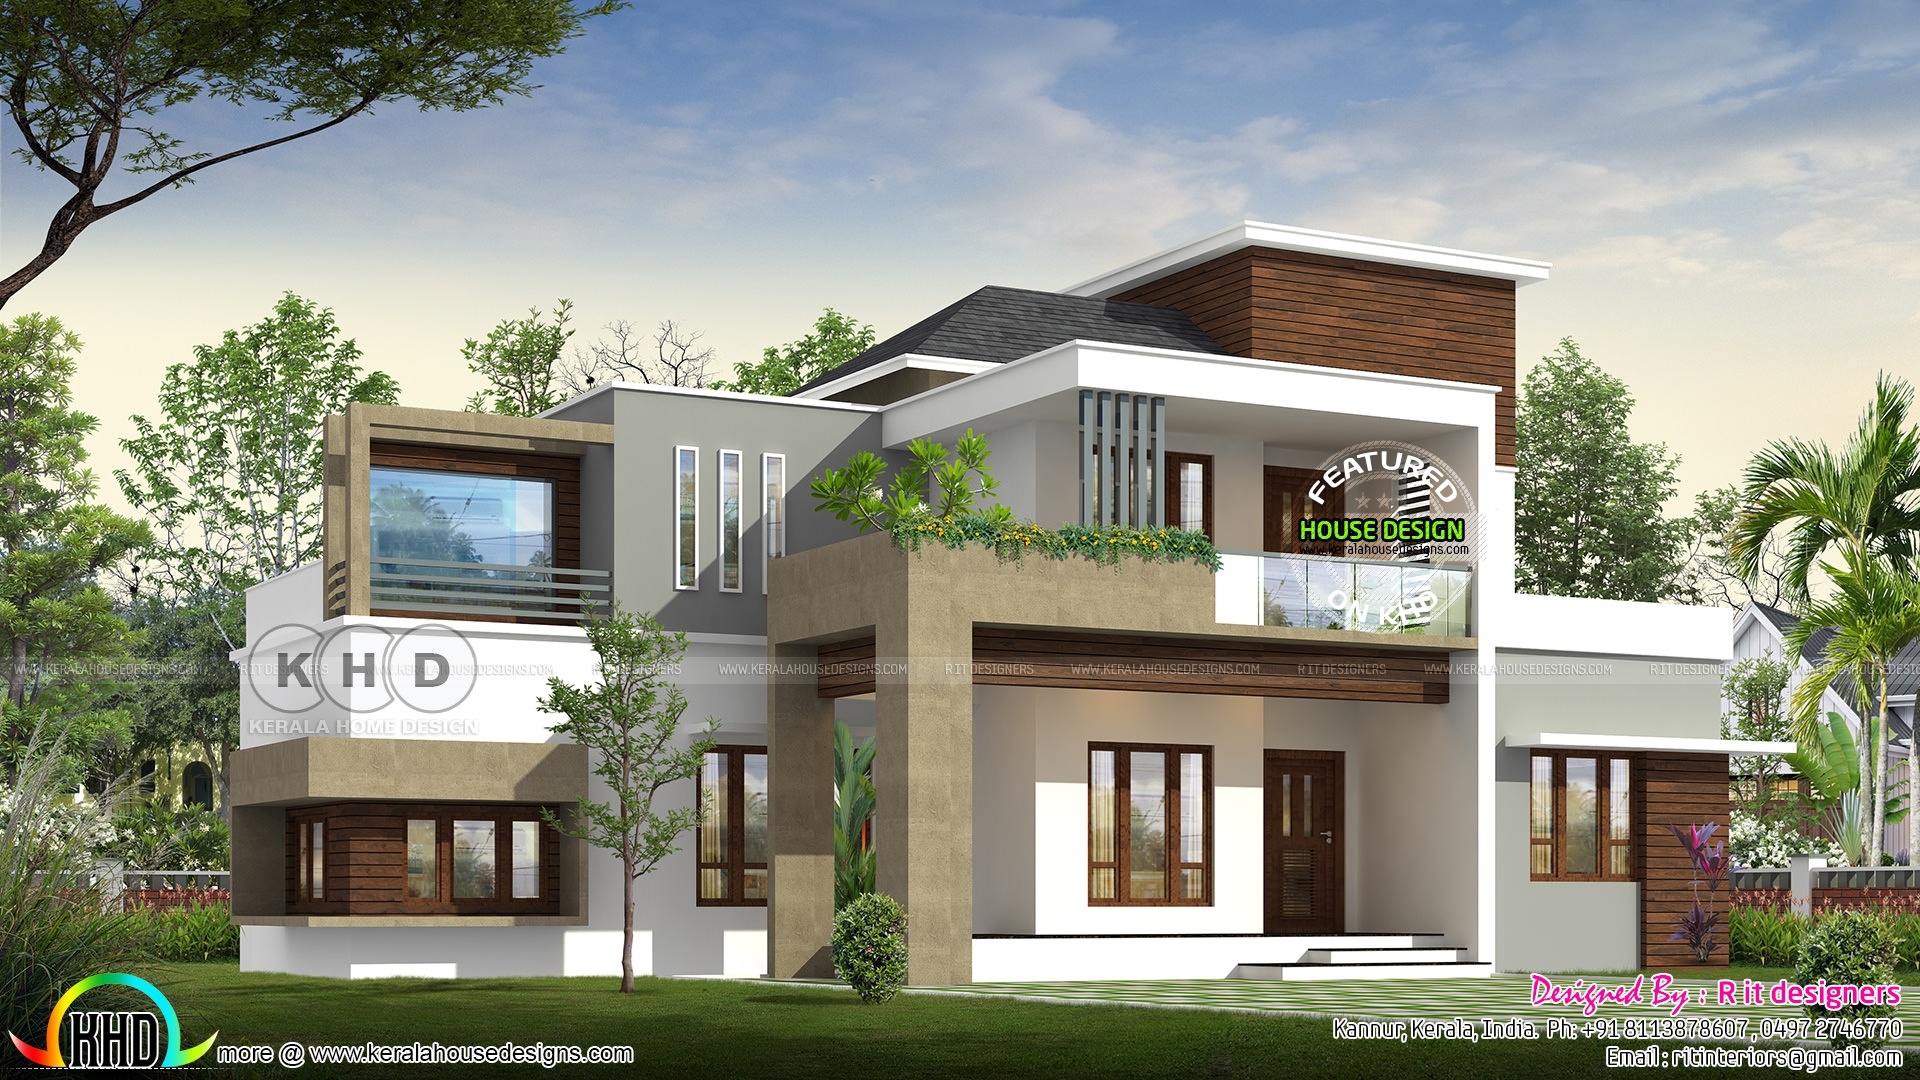 Interesting 2273 sq ft 4 bedroom modern contemporary house kerala home design and in images of contemporary houses in kerala